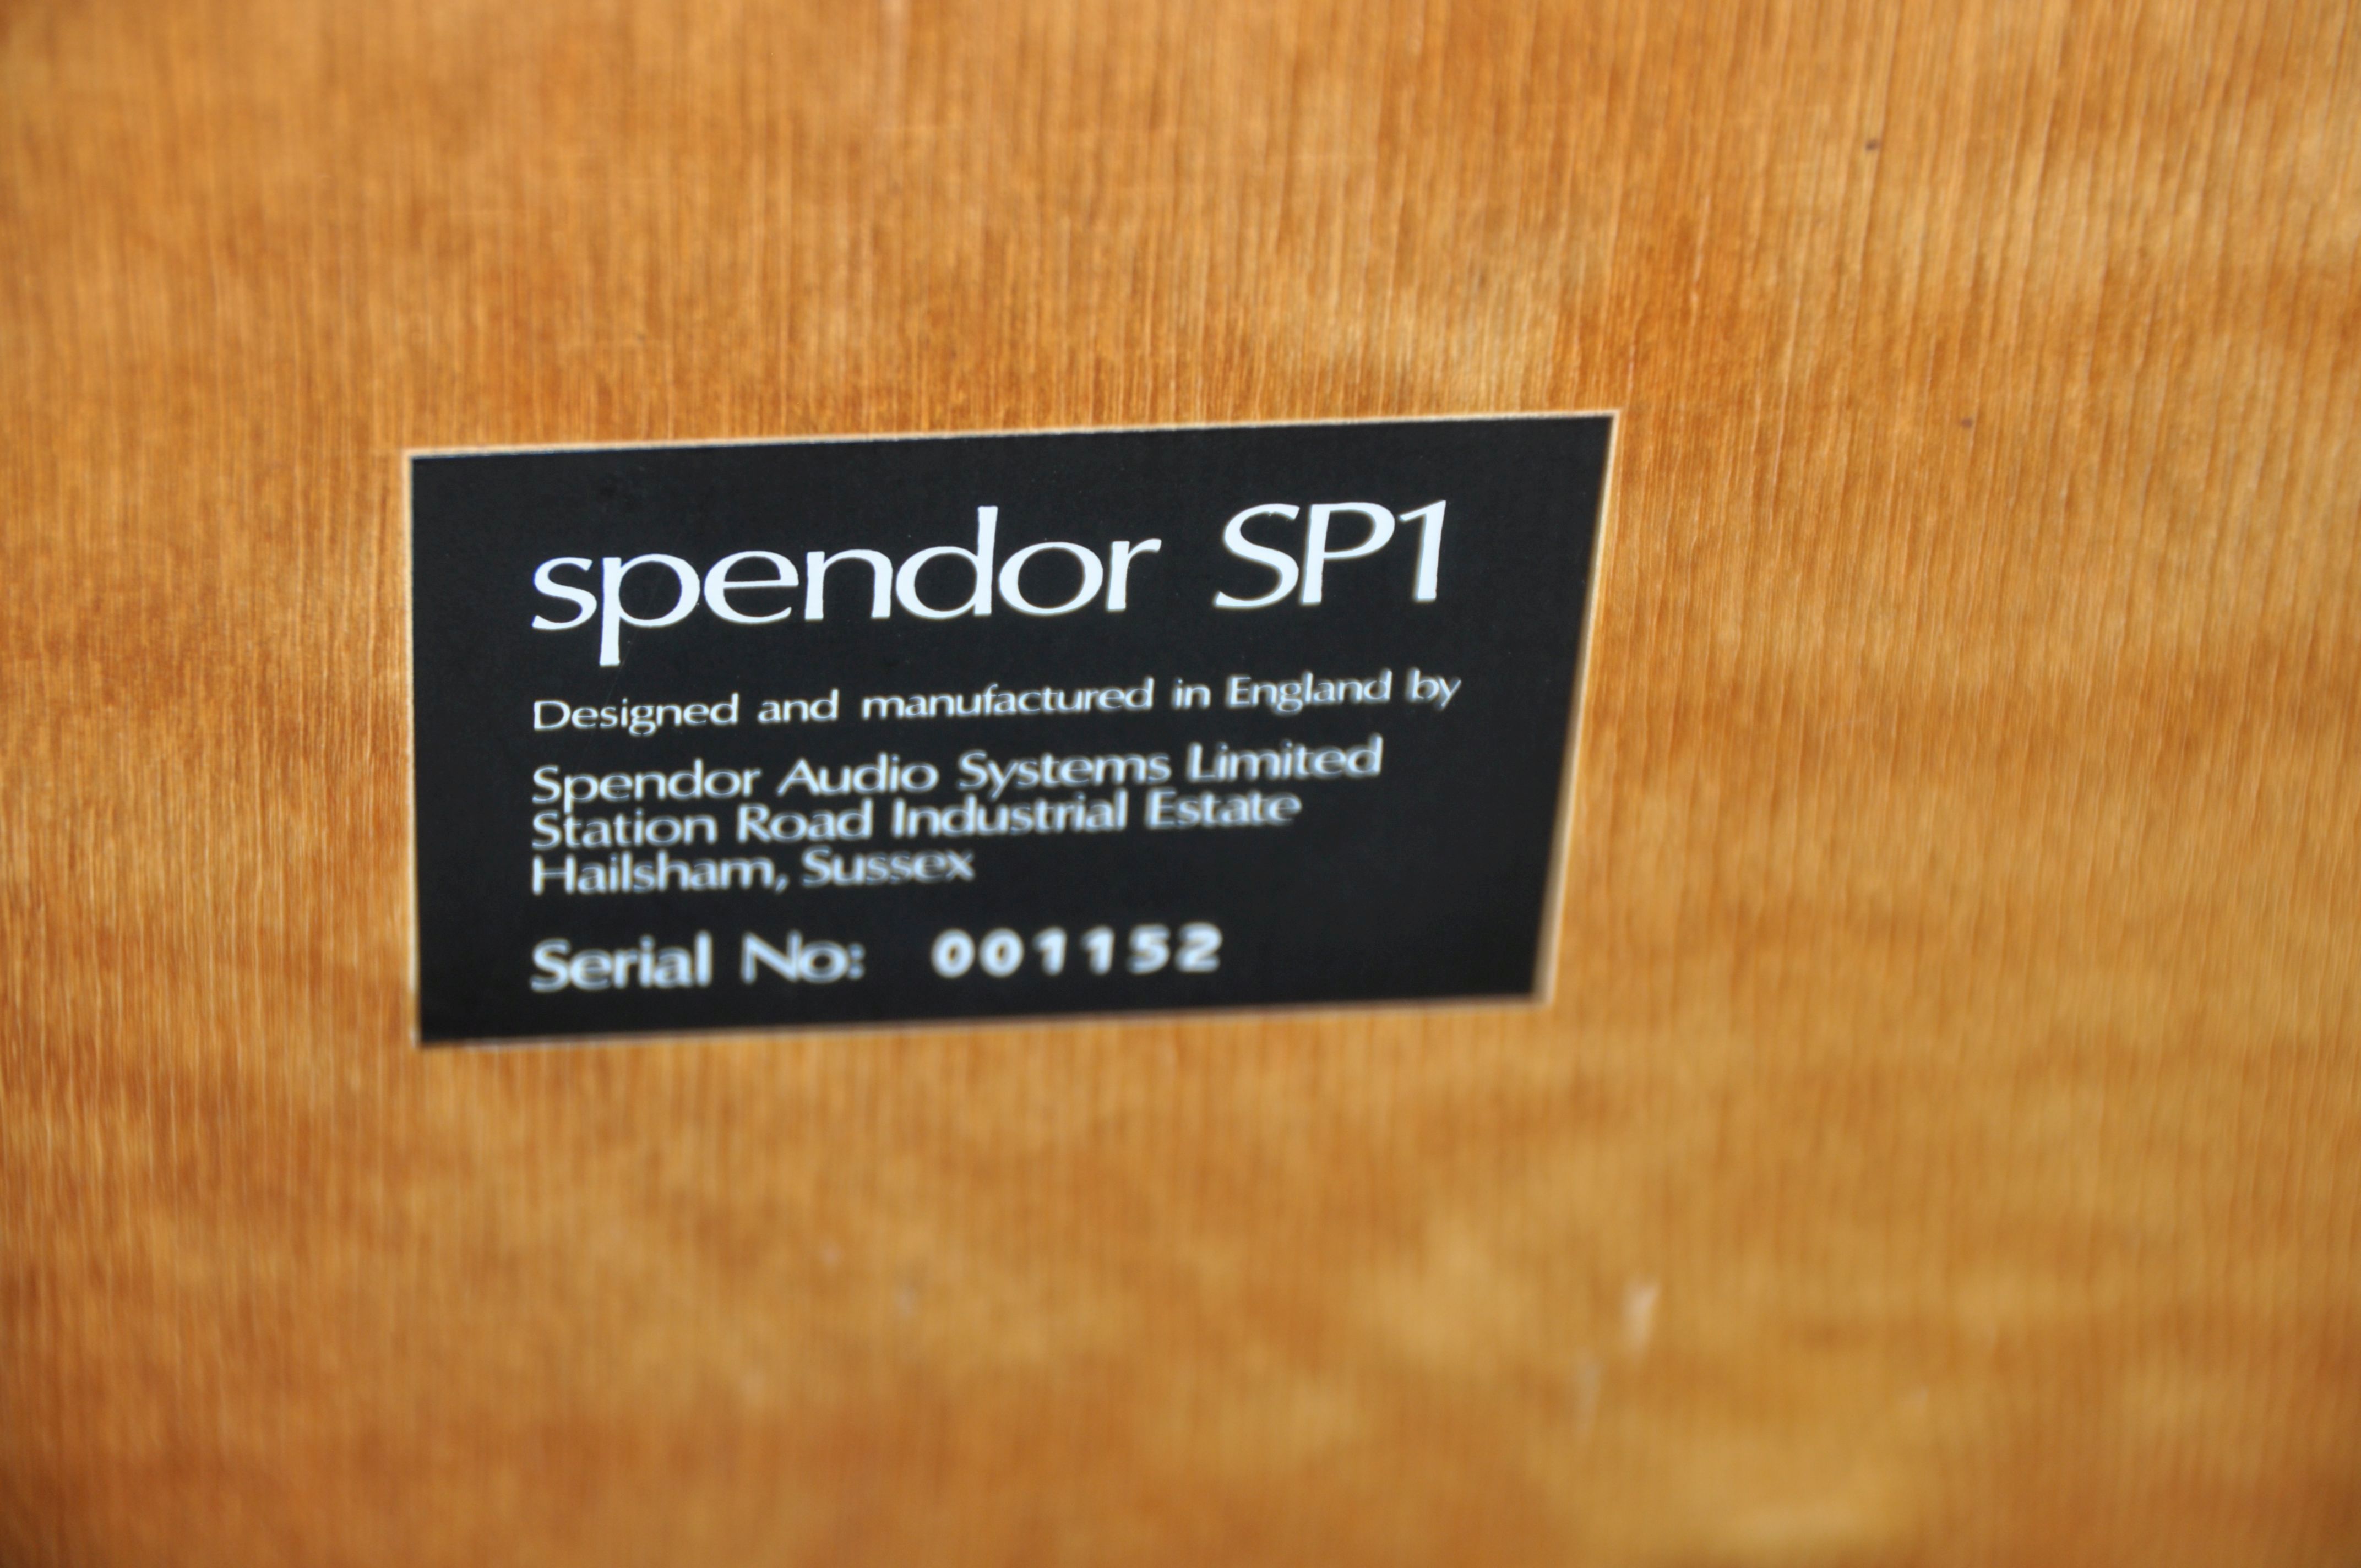 A PAIR OF SPENDOR SP1 VINTAGE HI FI SPEAKER CABINETS with two horns fitted but no 8in drivers in - Image 5 of 6